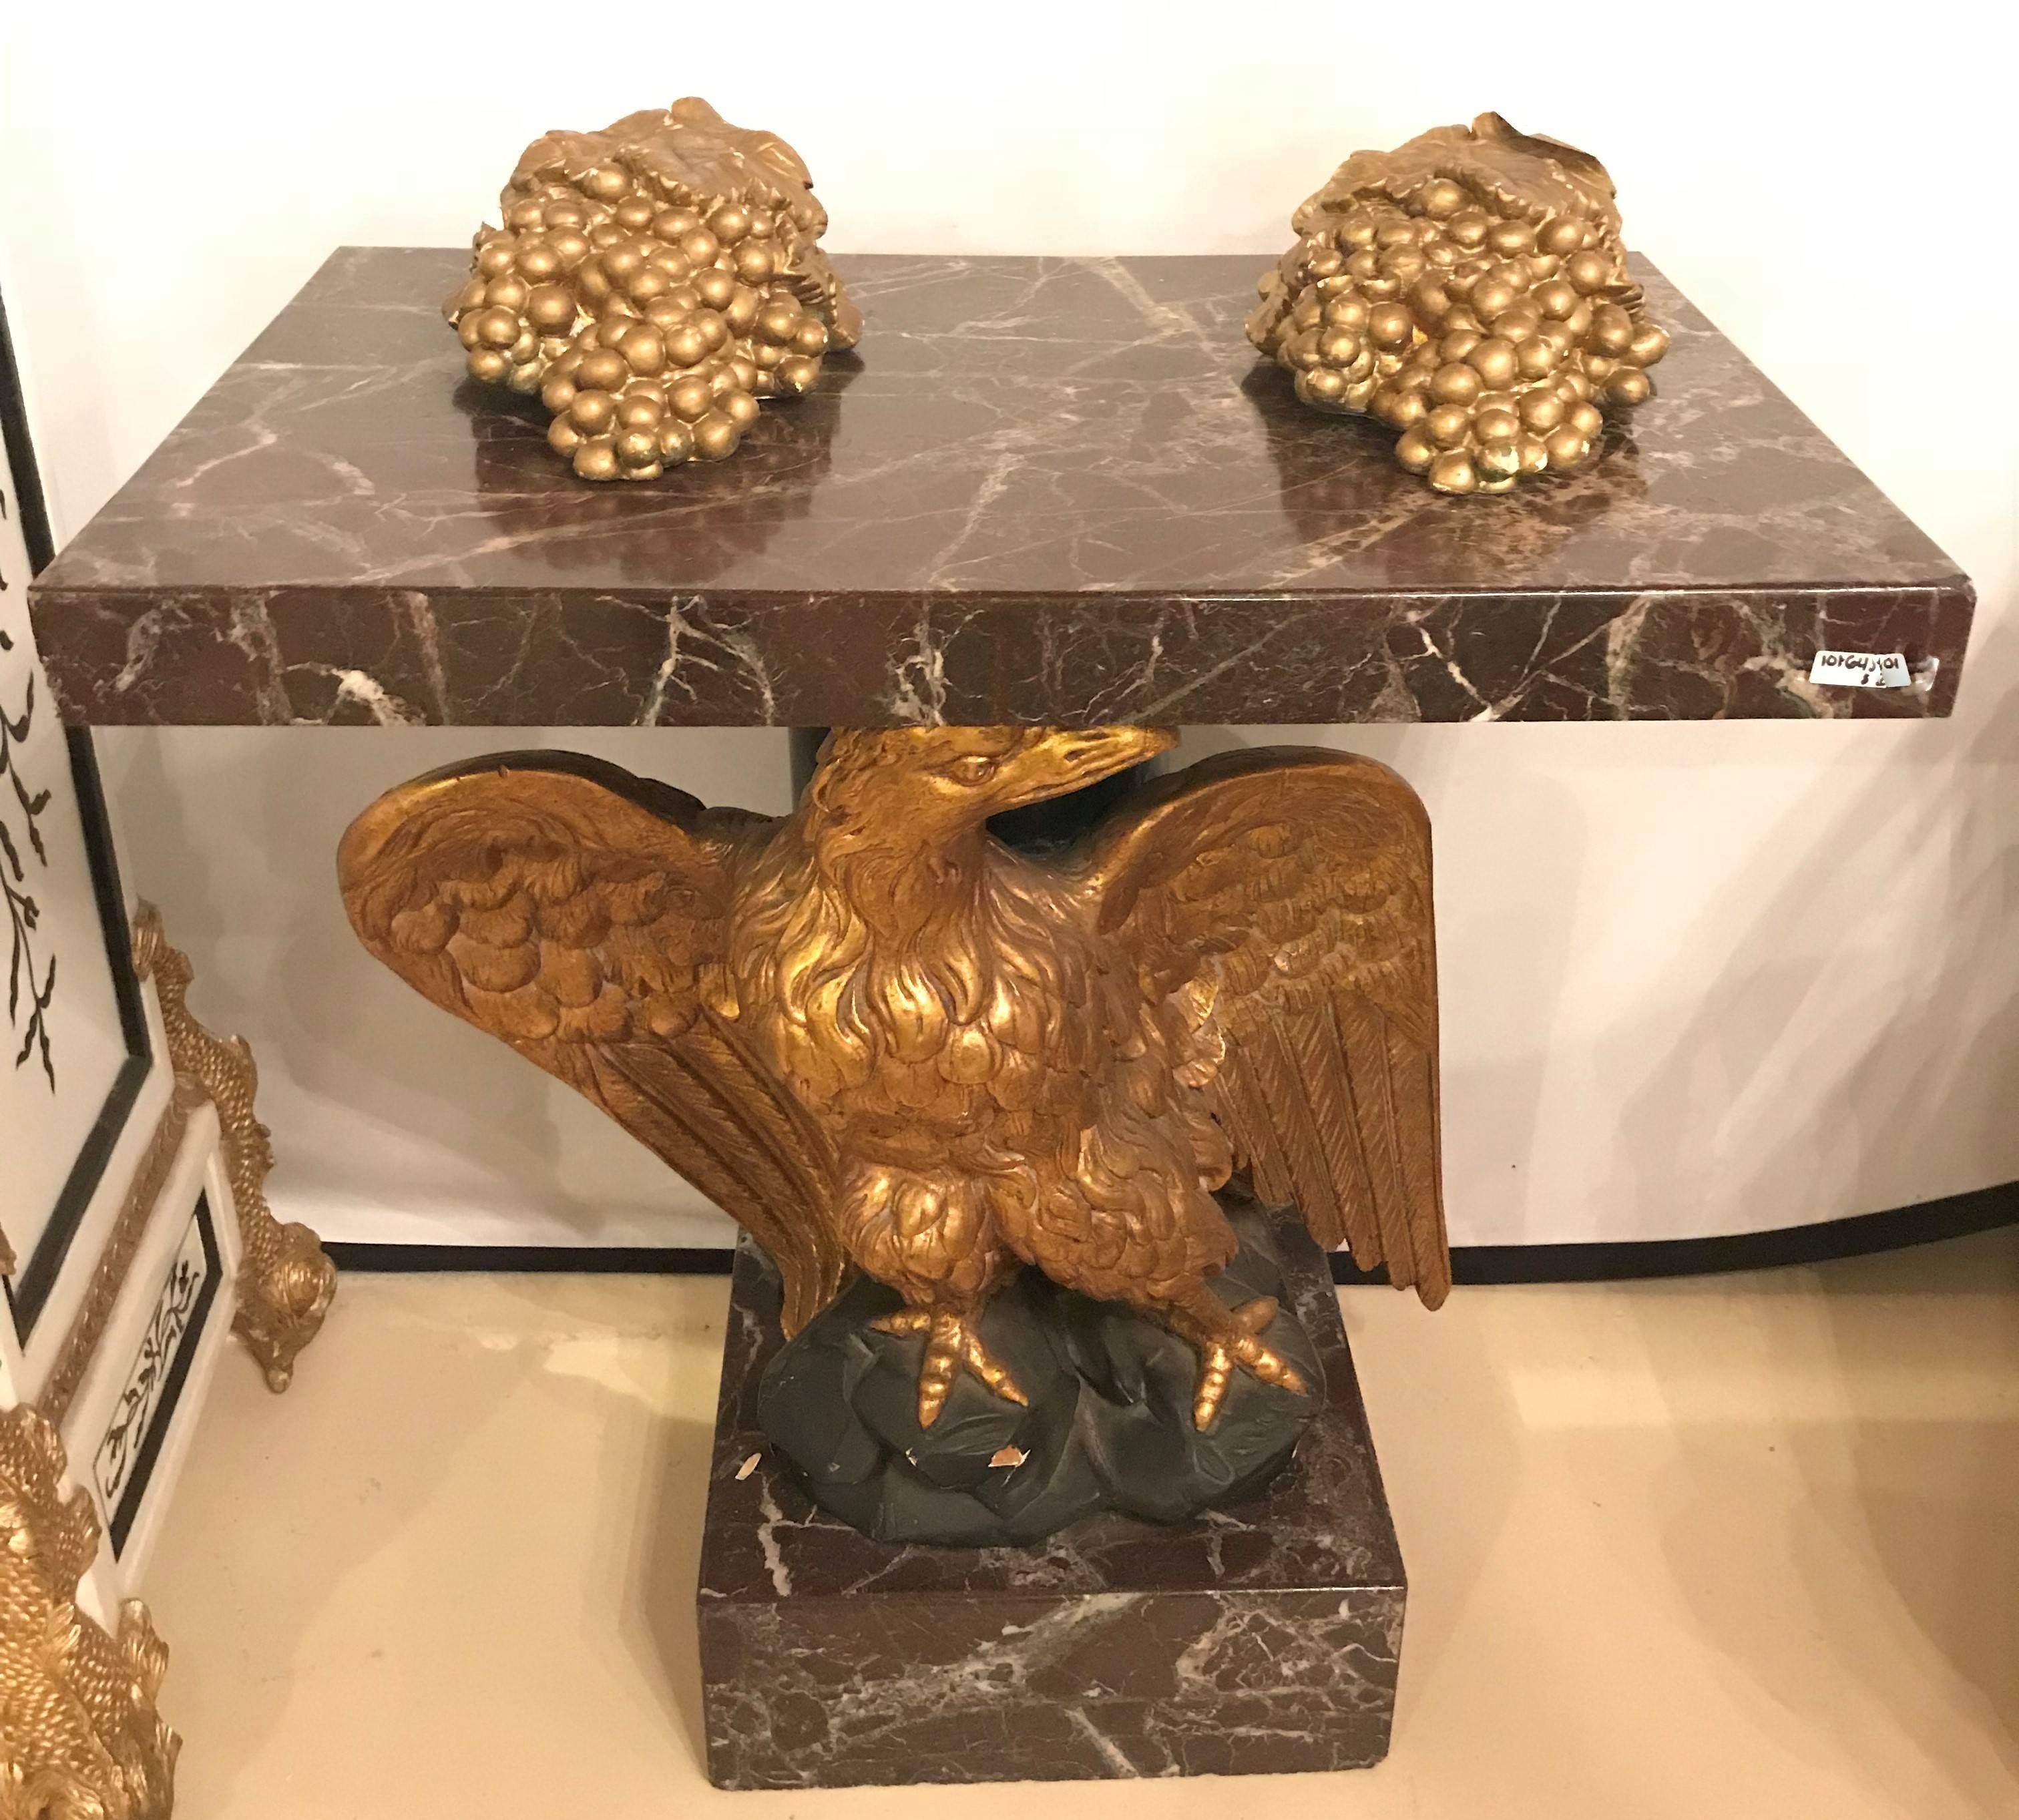 A large gilded eagle marble-top and base console or pedestal table. Federal style giltwood carved eagle pedestal table. Fabulous detail in this piece down to the eagle's claws sitting on the rocks. A marble base matching the marble-top adds to this